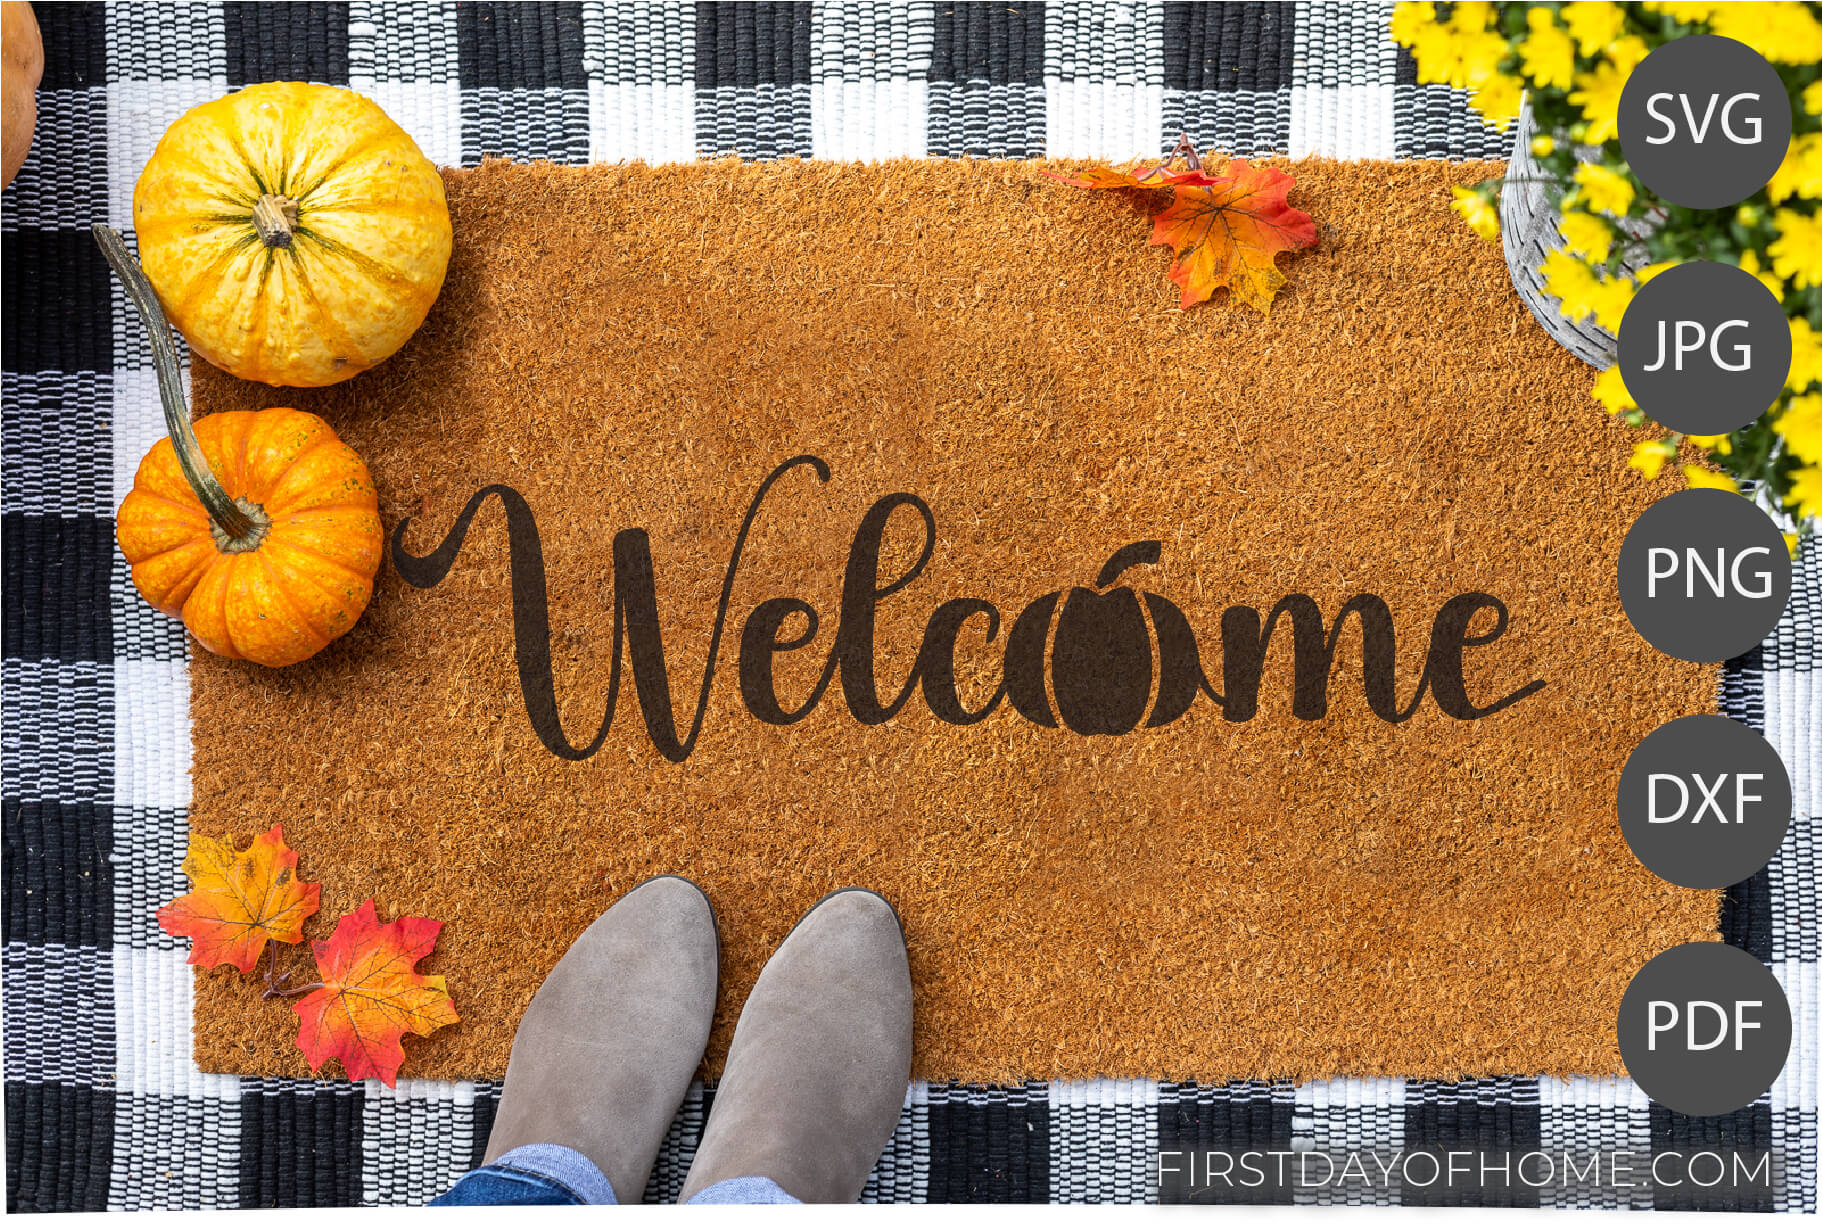 Mockup example of Welcome mat with pumpkin for letter "o" using digital files. Lists digital files as SVG, JPG, PNG, DXF and PDF